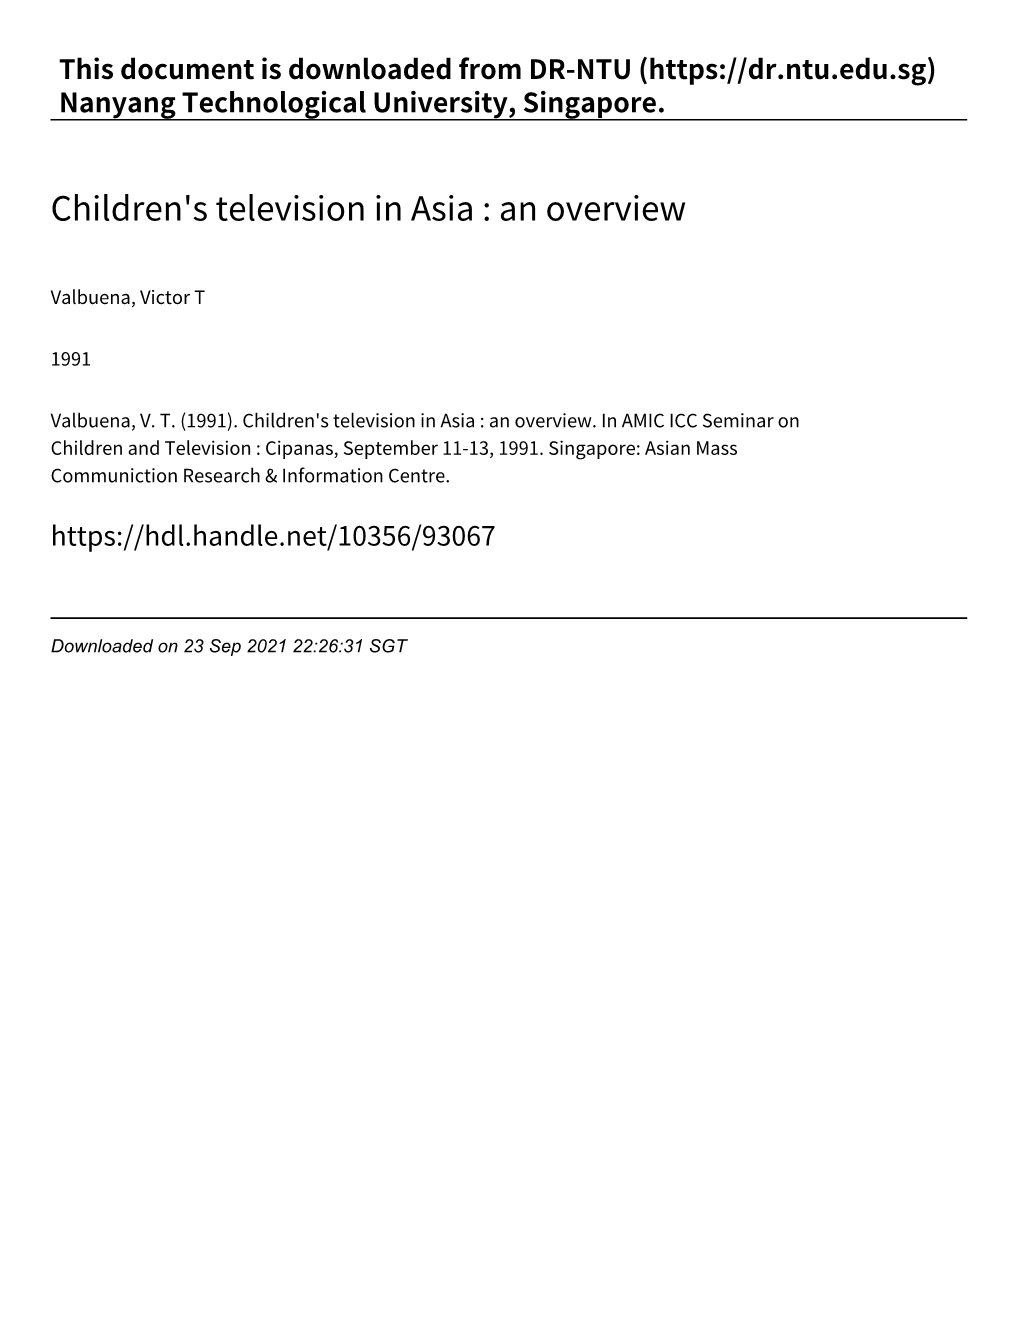 Children's Television in Asia : an Overview